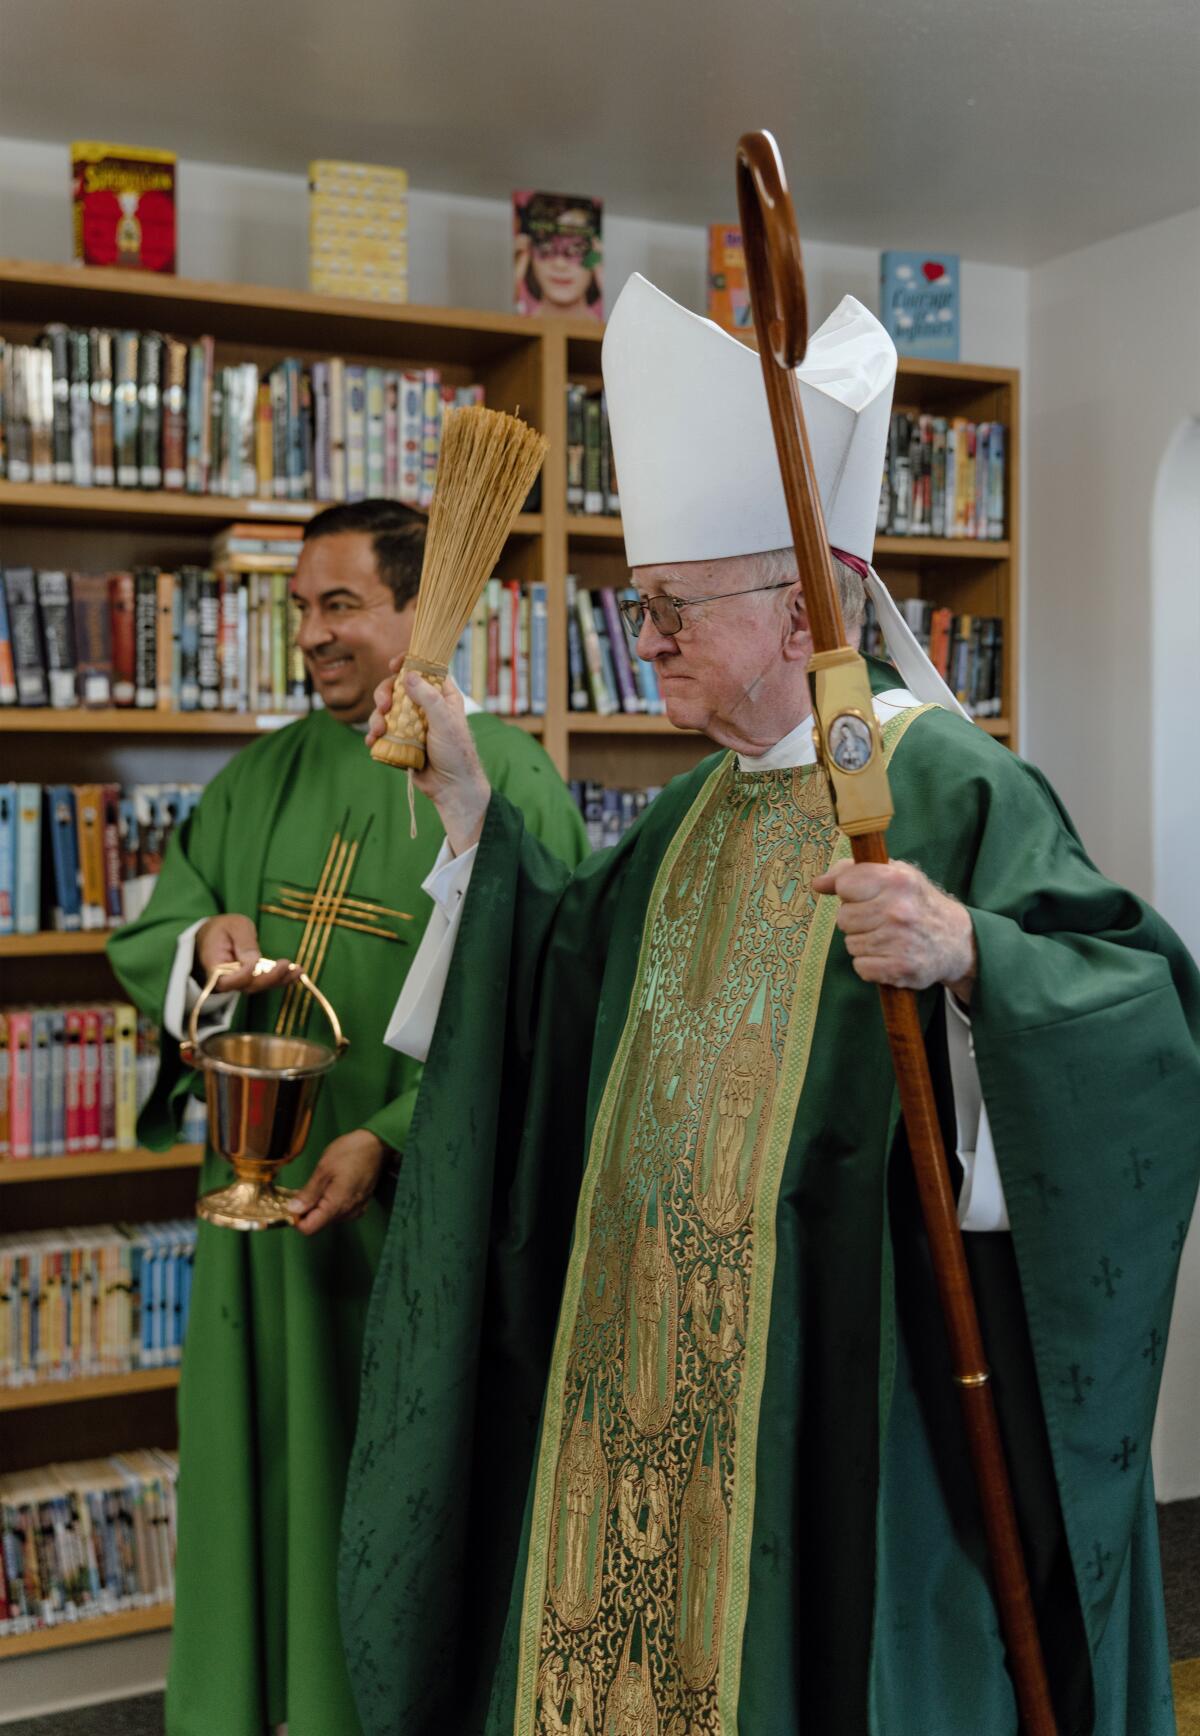 Bishop Kevin Vann, of the Diocese of Orange, blesses a new library at Saint Joachim School.